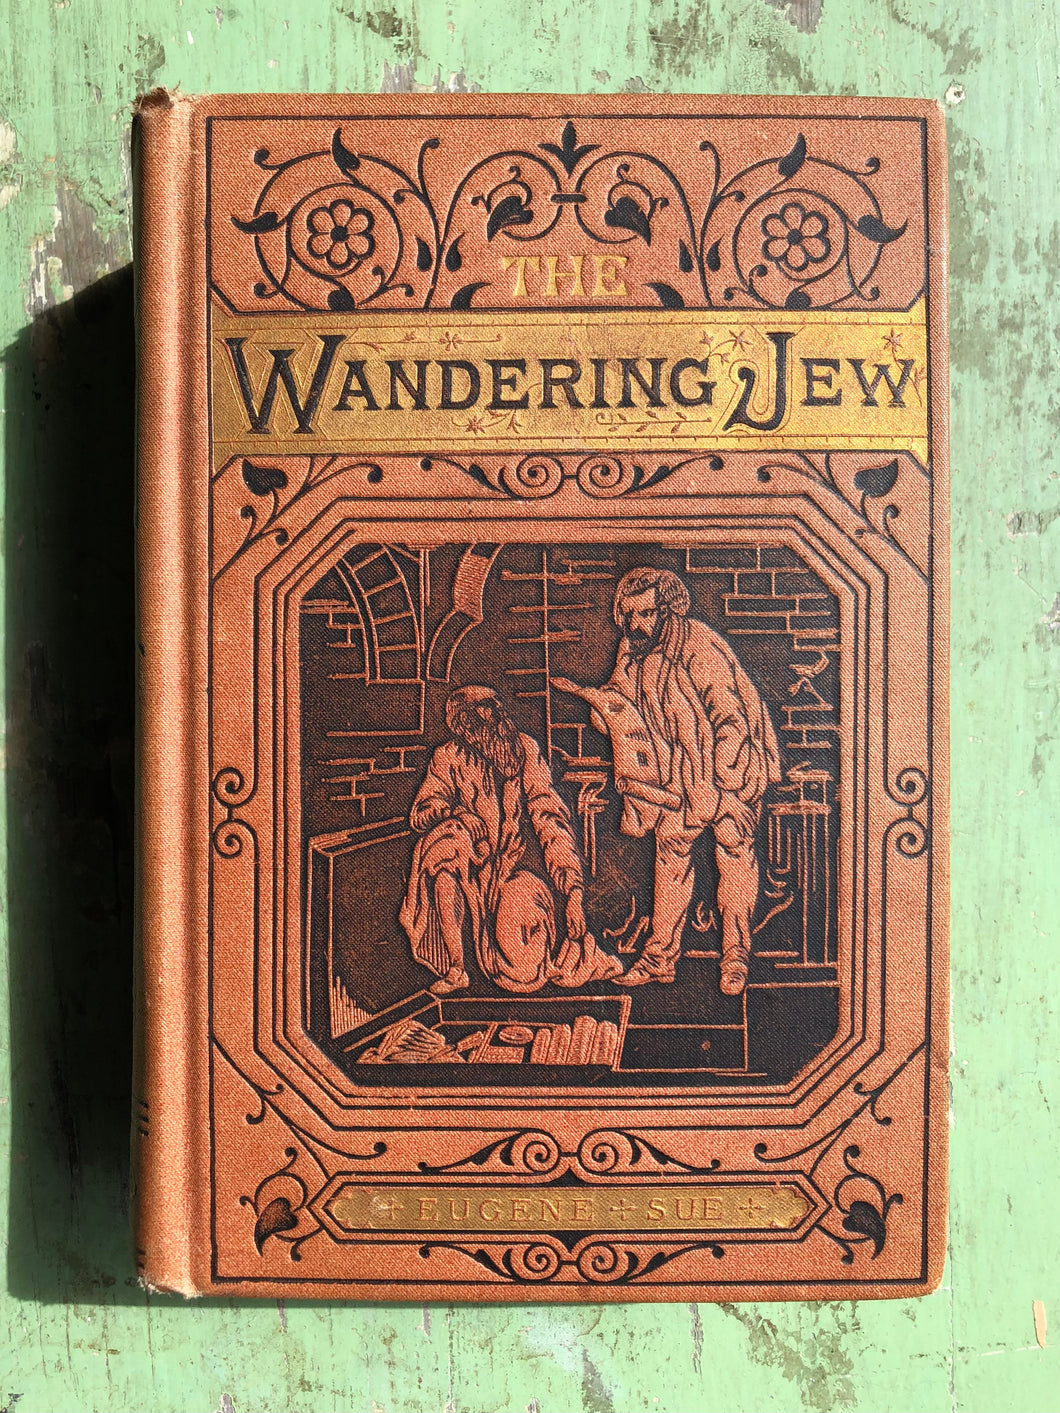 The Wandering Jew by Eugene Sue